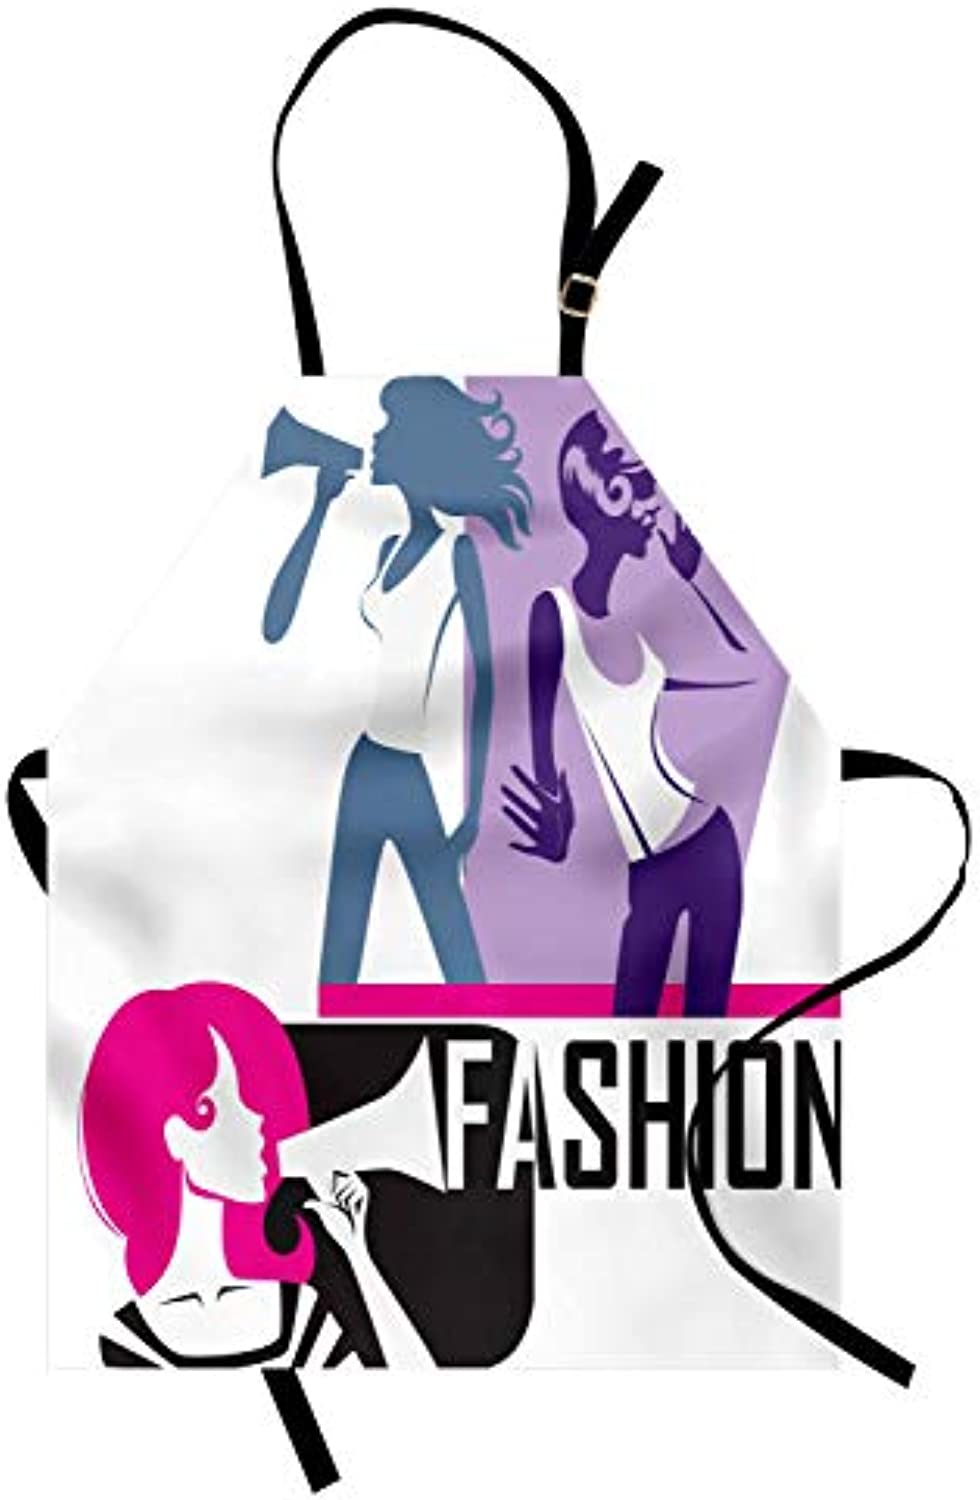 Granbey Feminine Apron  Composition of Girls Yelling into Megaphone Modern Fashion Themed Art Print  Unisex Kitchen Bib with Adjustable Neck for Cooking Gardening  Adult Size  Purple Black